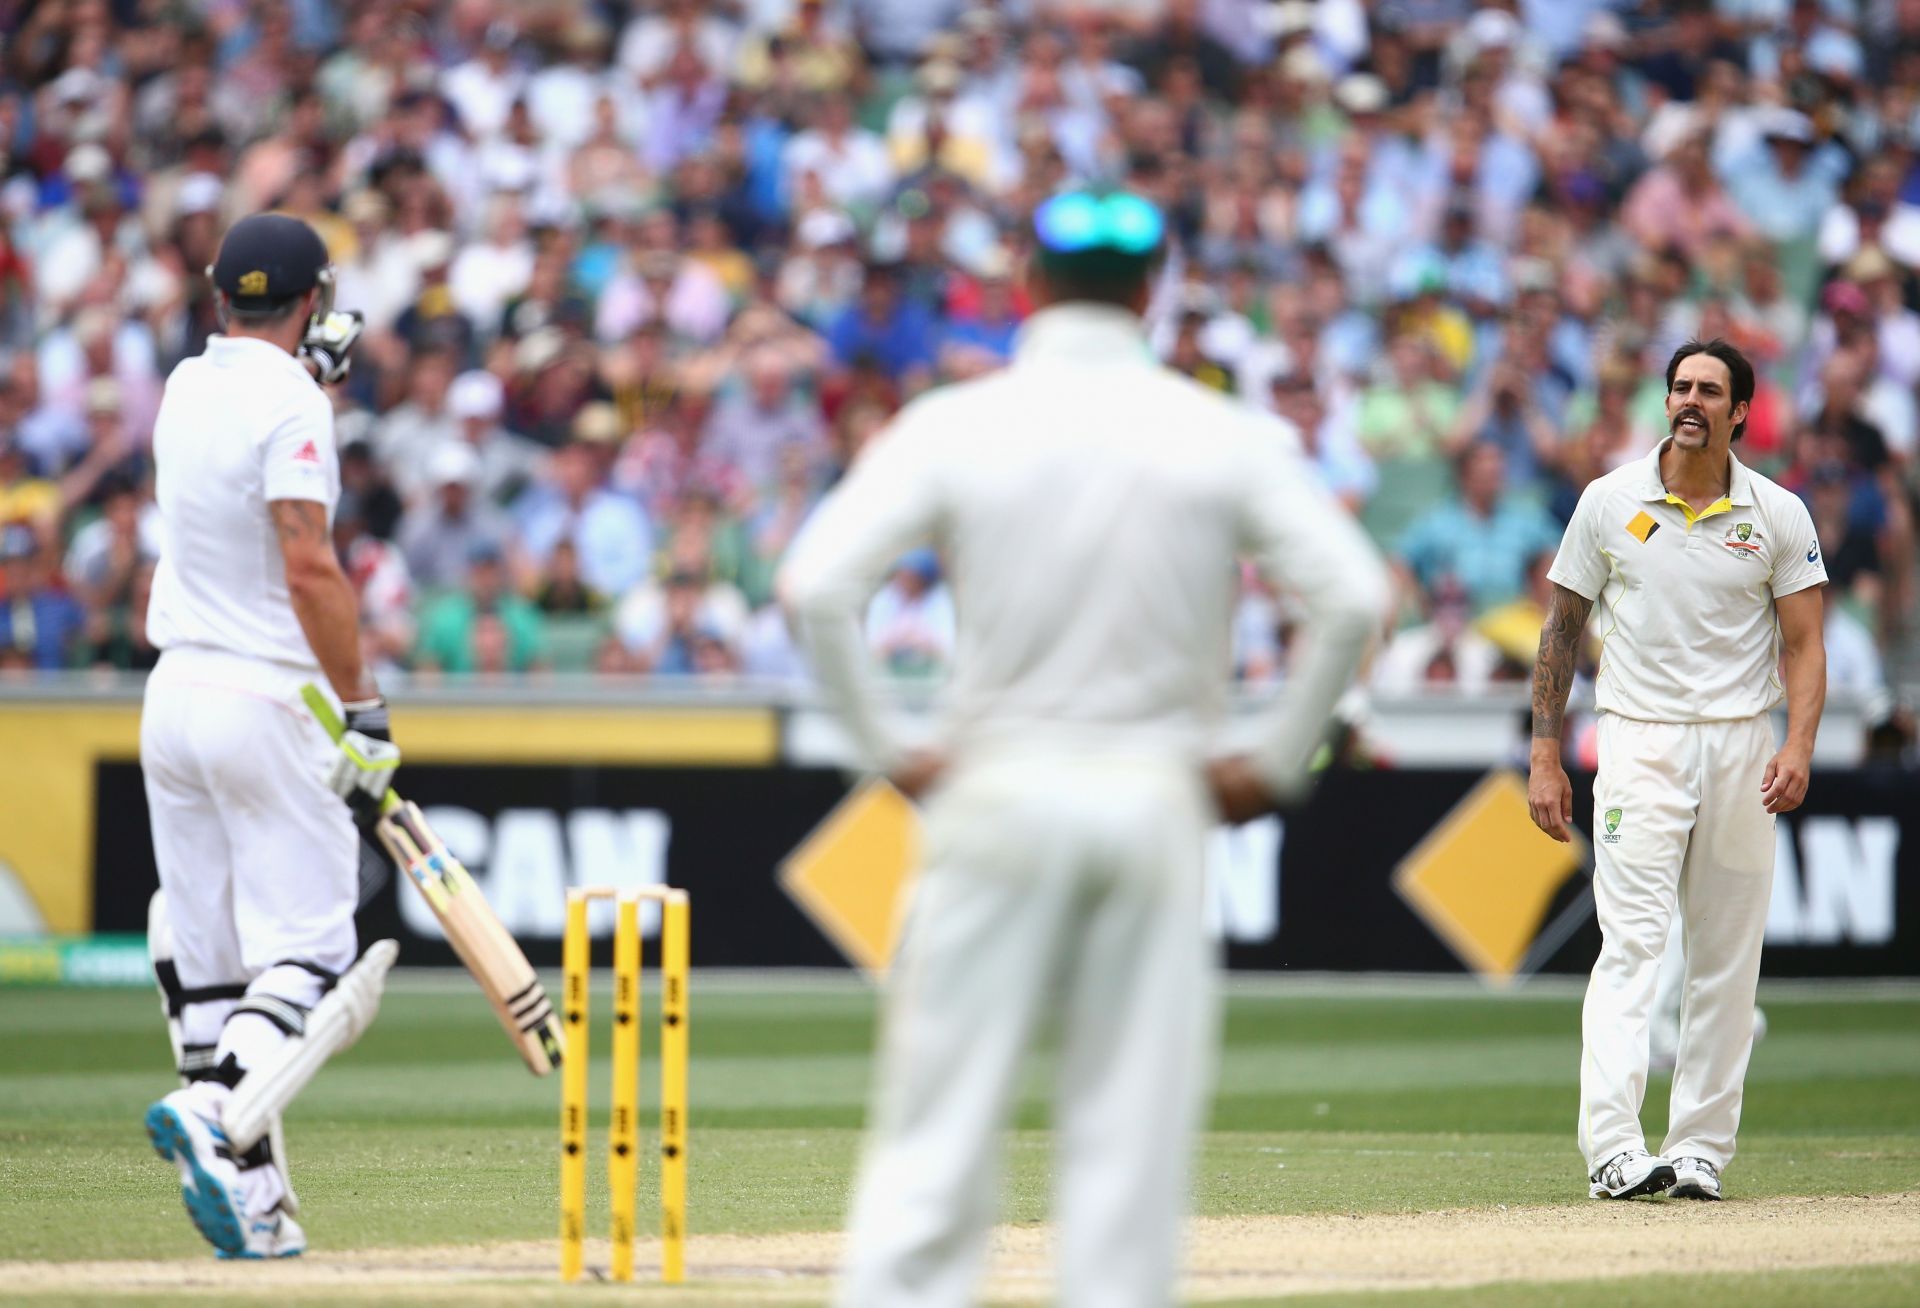 Mitchell Johnson (right) has a word with Kevin Pietersen. (Pic: Getty Images)